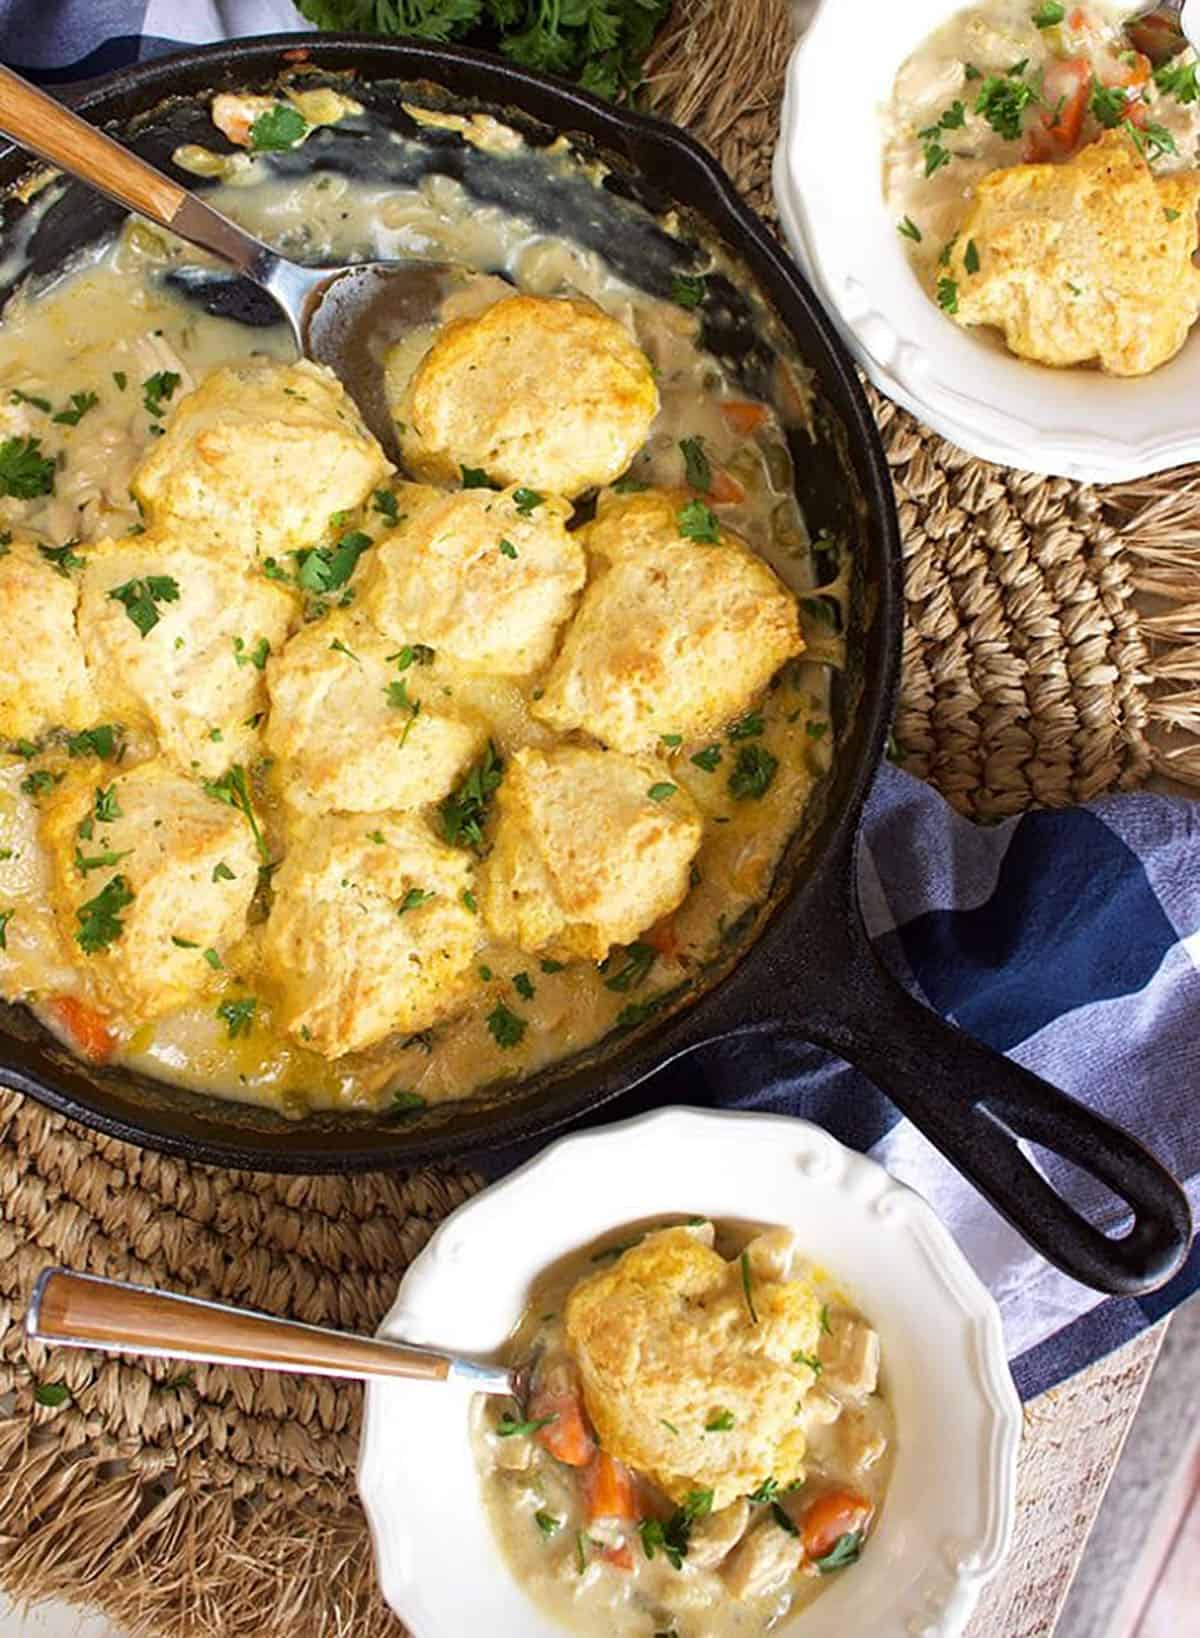 Chicken and dumplings in a skillet on a wicker placemat with two white bowls filled with chicken and dumplings.